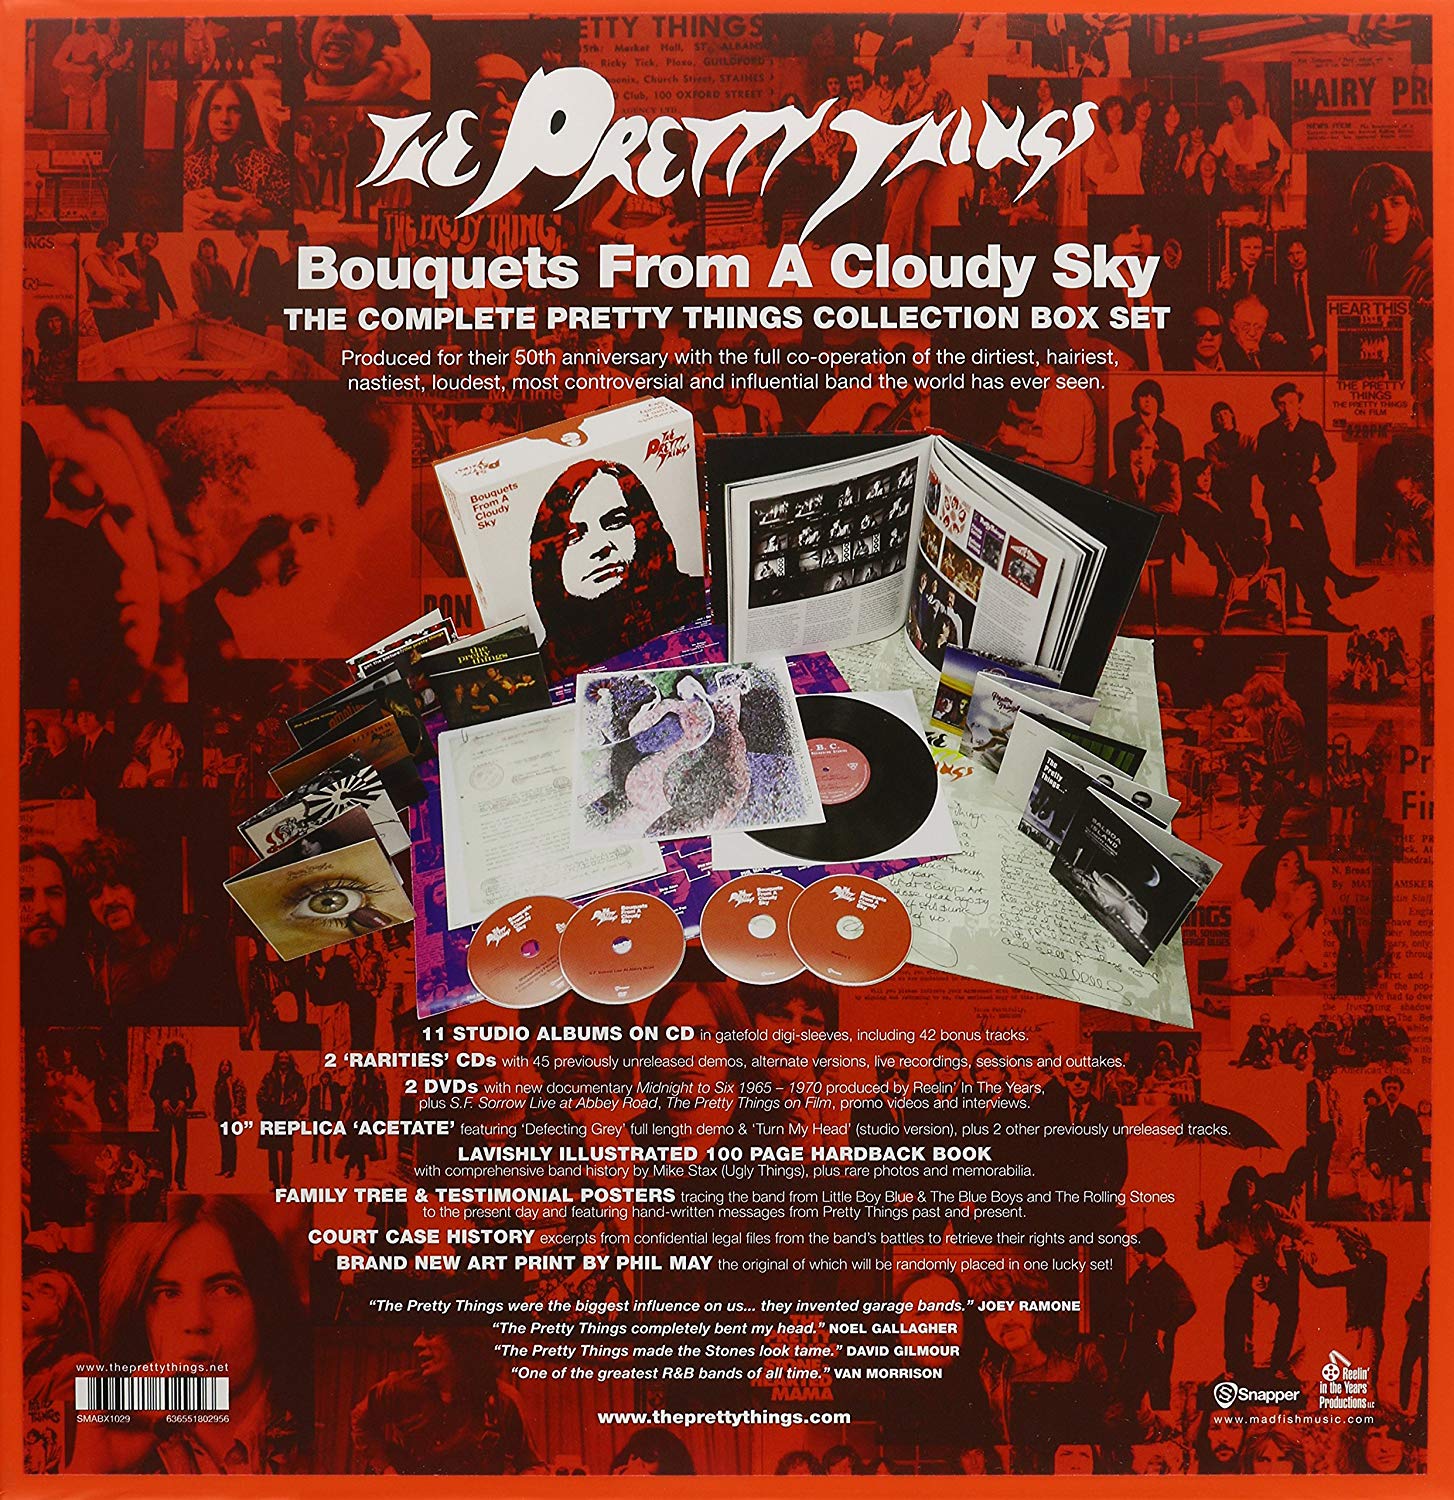 The Pretty Things – Bouquets From A Cloudy Sky